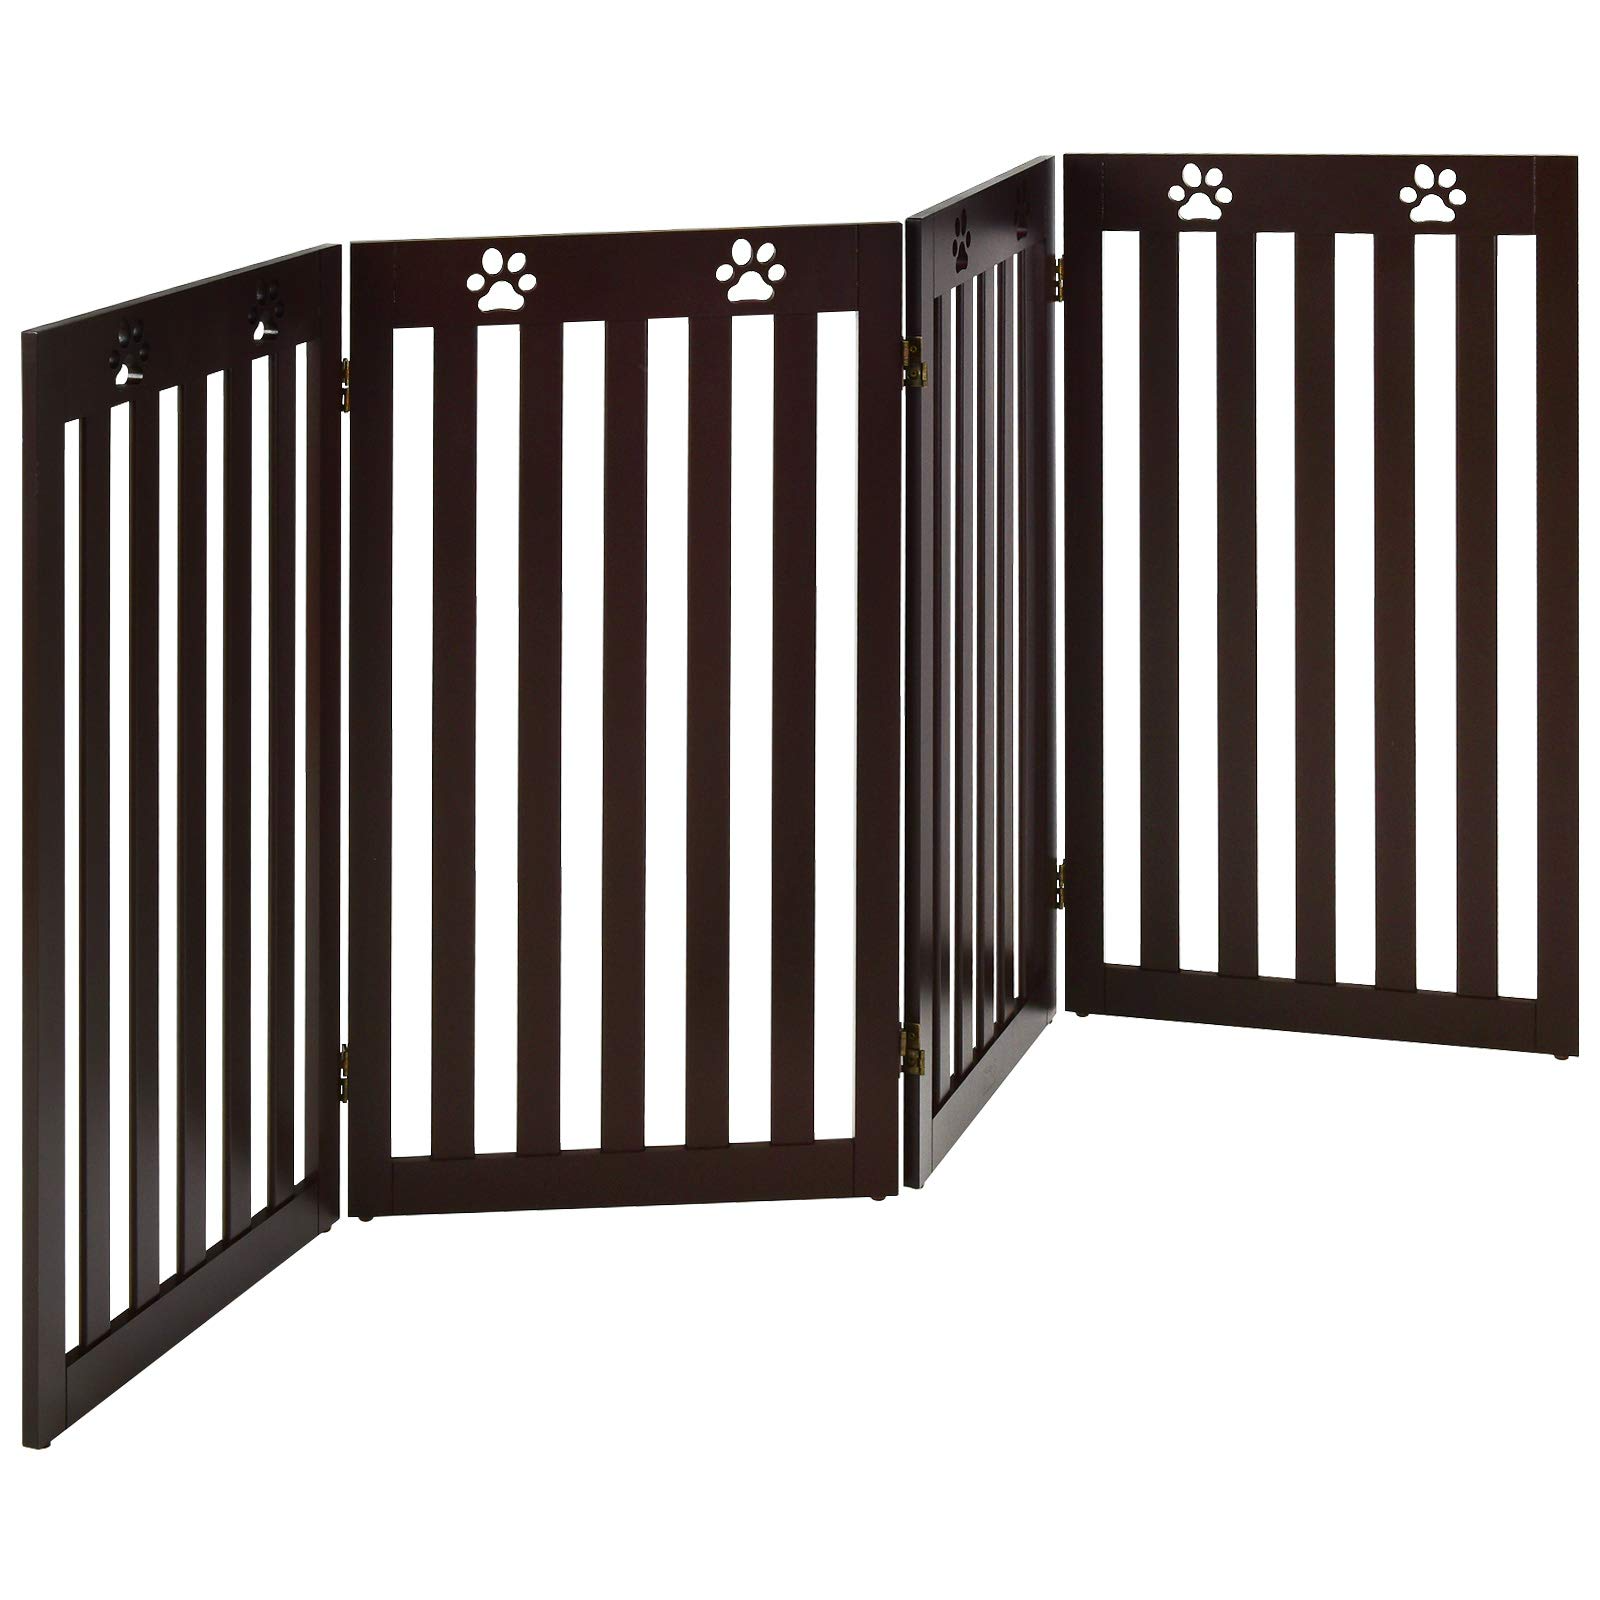 Giantex Wooden Freestanding Pet Gate, 4 Panel-36 inch Height Large Dog Fence